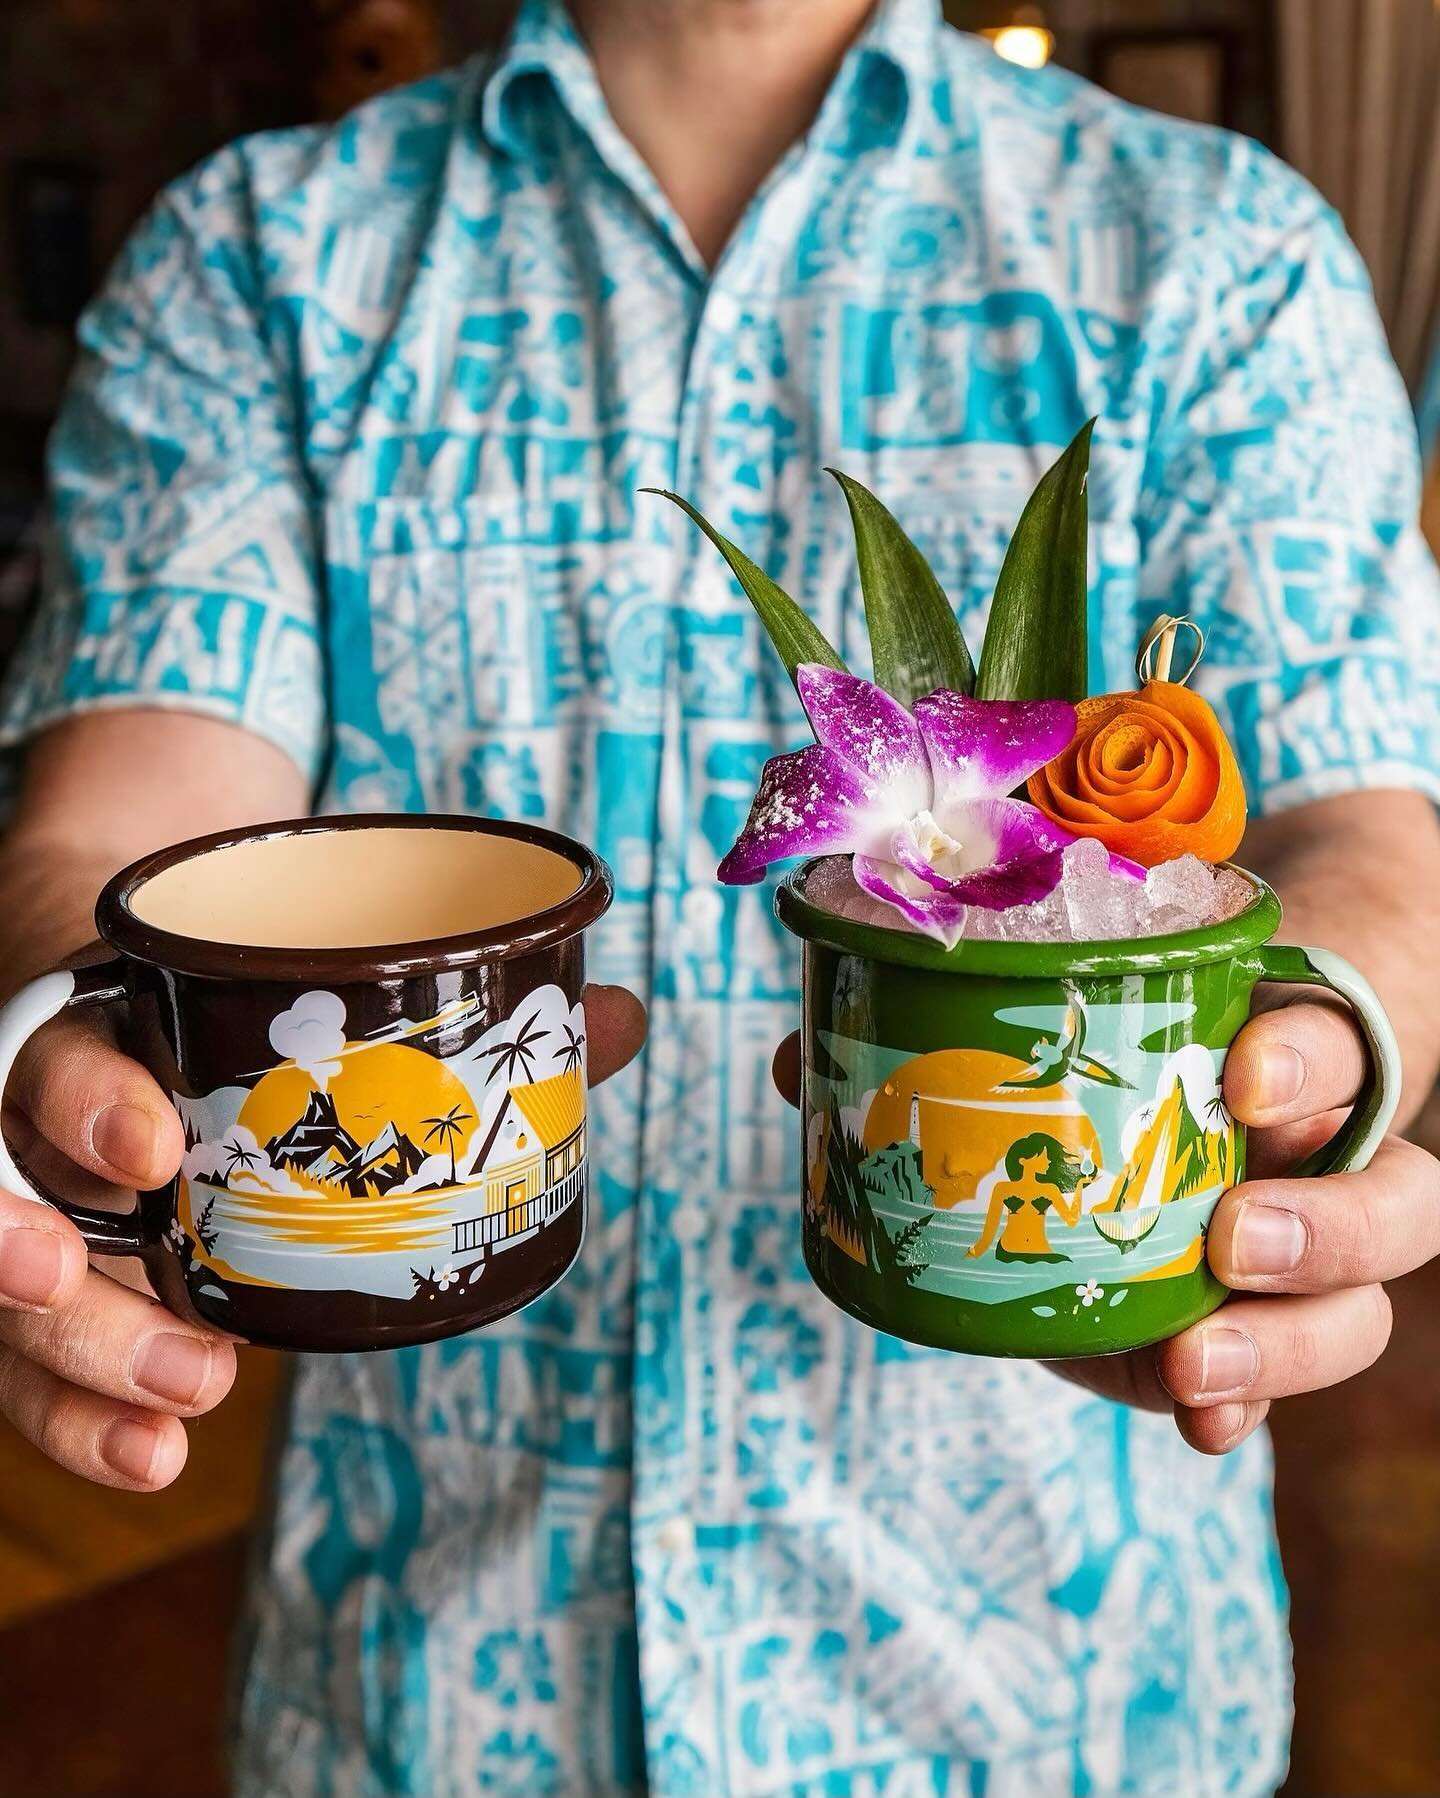 Just in time for those sun-soaked days ahead! &lsquo;Tropical Tide&rsquo; camp mugs, produced in collaboration with my buds at @hiddenharborpgh.🌴☀️ Crafted for your outdoor adventures, porch lounging, and island-inspired drinks. Available now at Hid